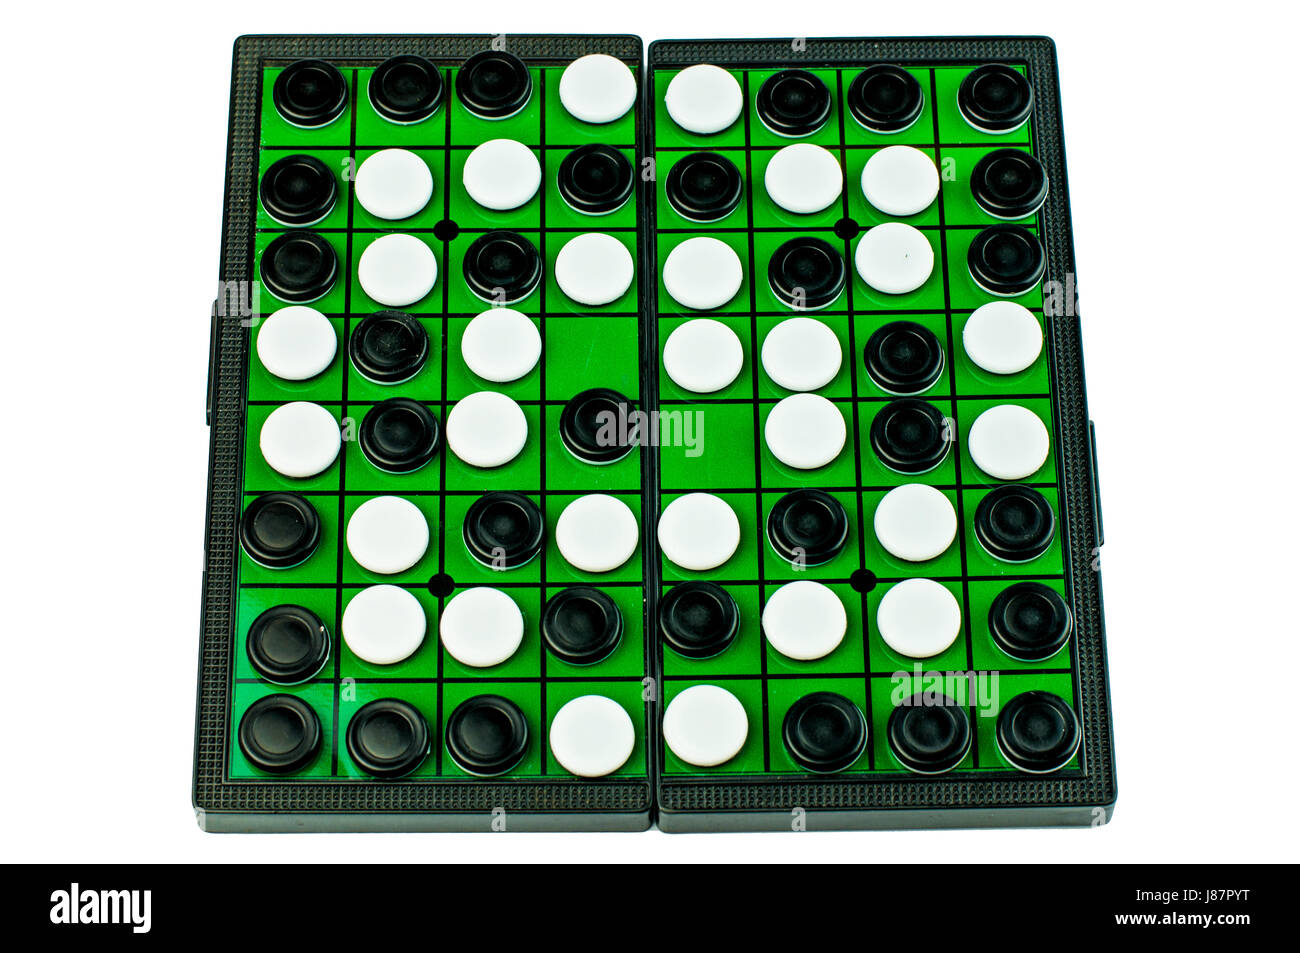 Black and White Othellos on Green Grid Othello Board Isolated Stock Photo